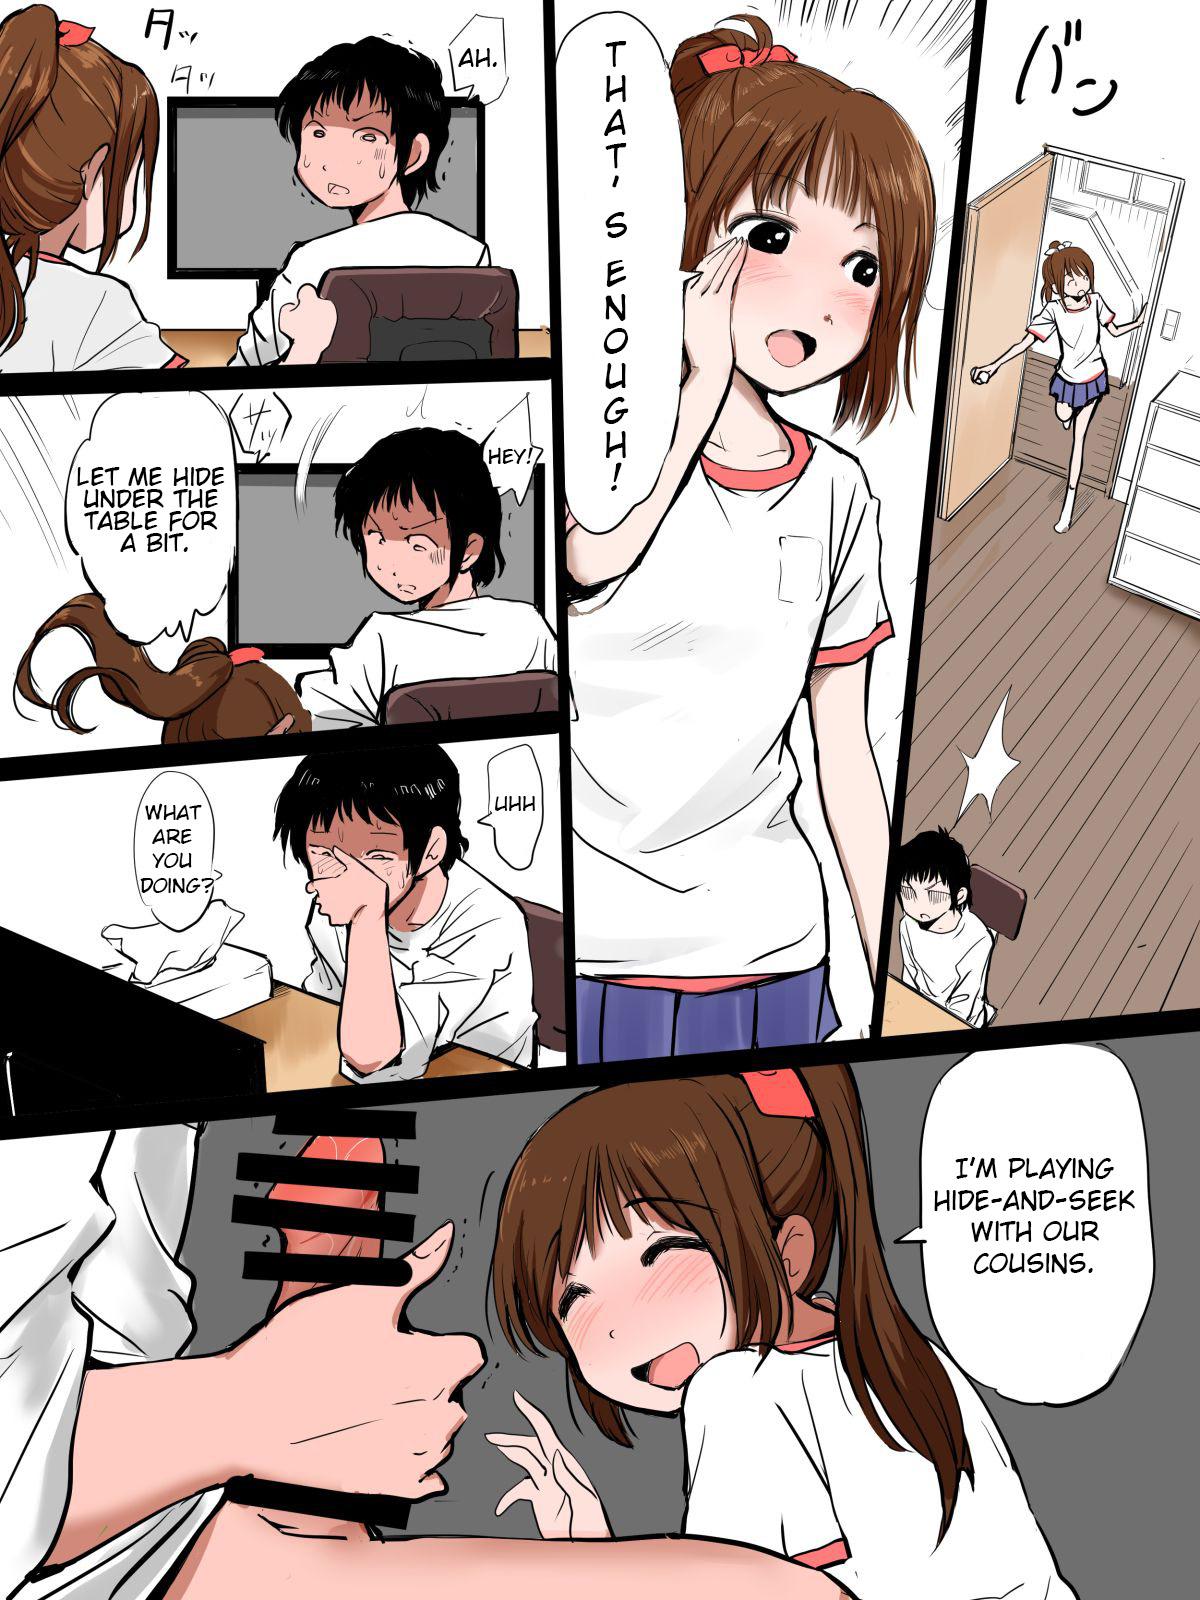 It's a manga about a little sister sucking on her big brother's penis 0